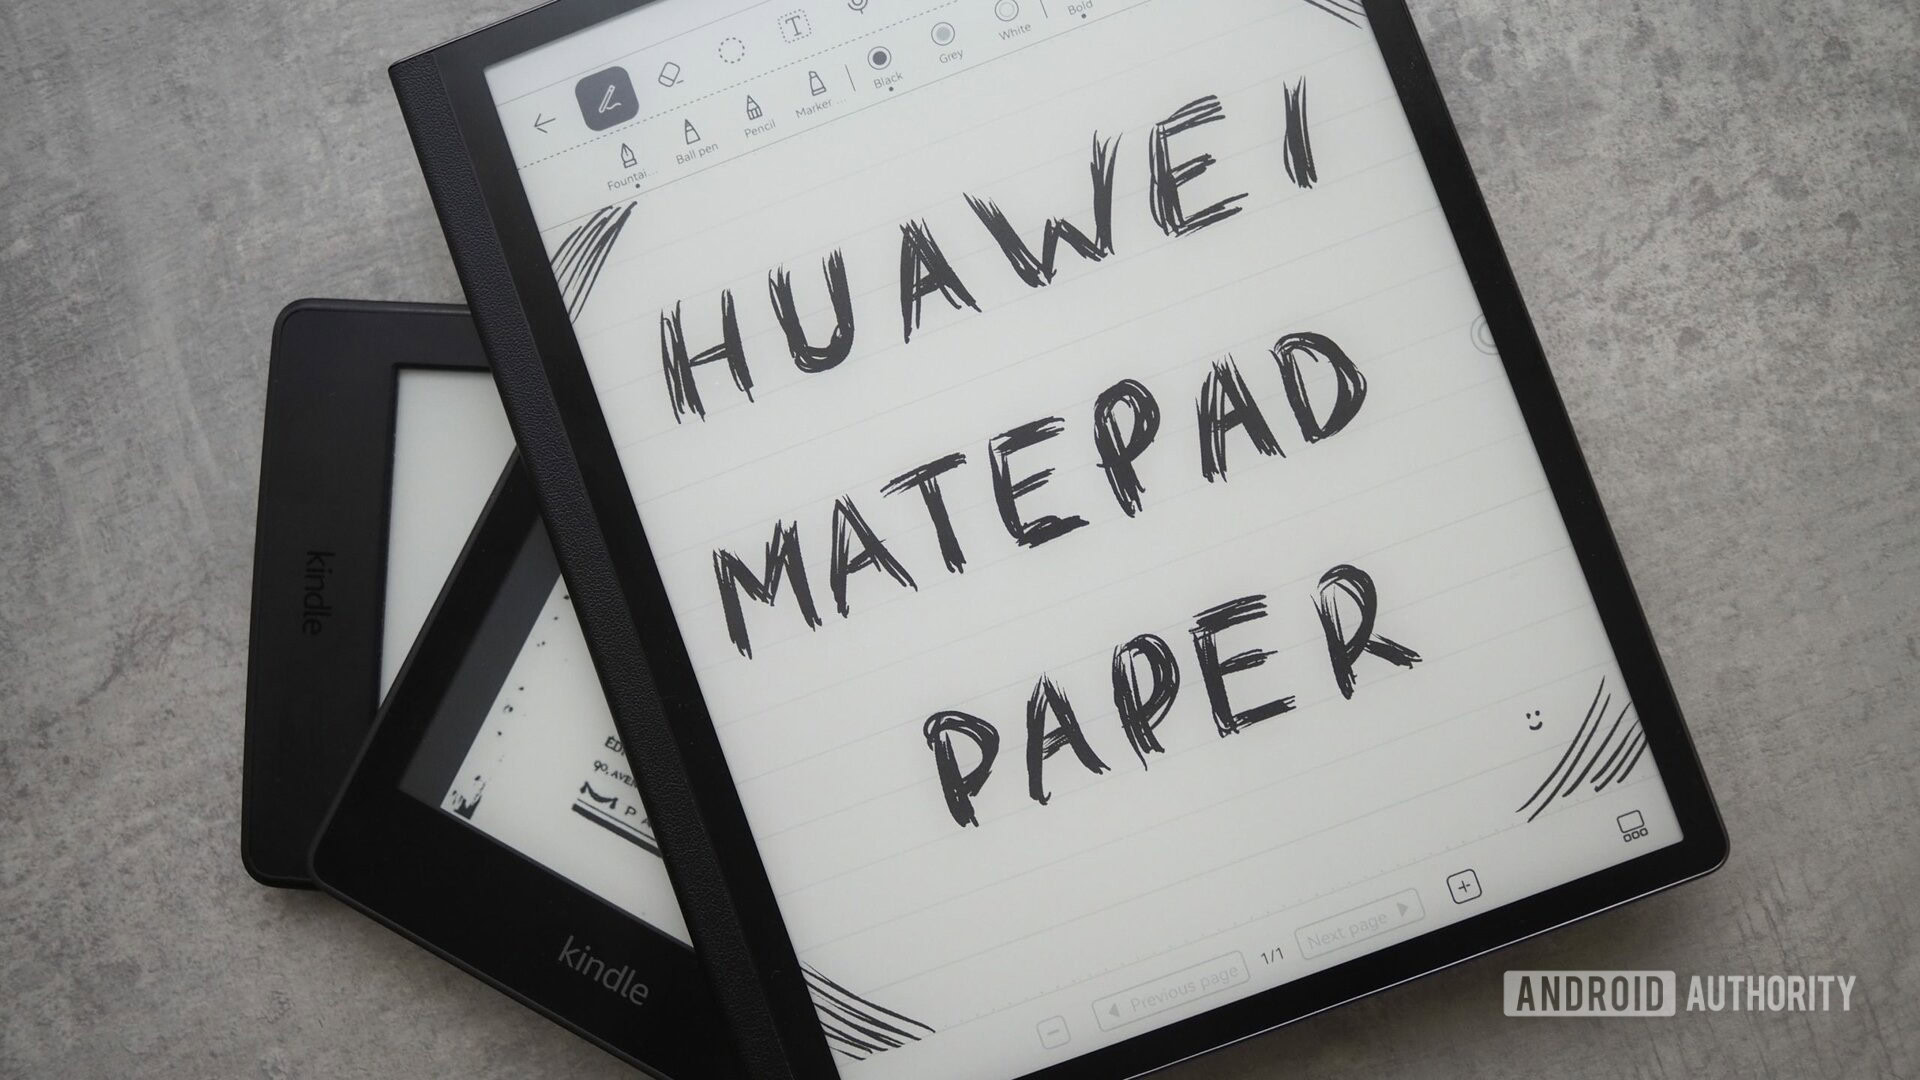 HUAWEI Matepad Paper review: Sorry, e-ink and Android aren't a